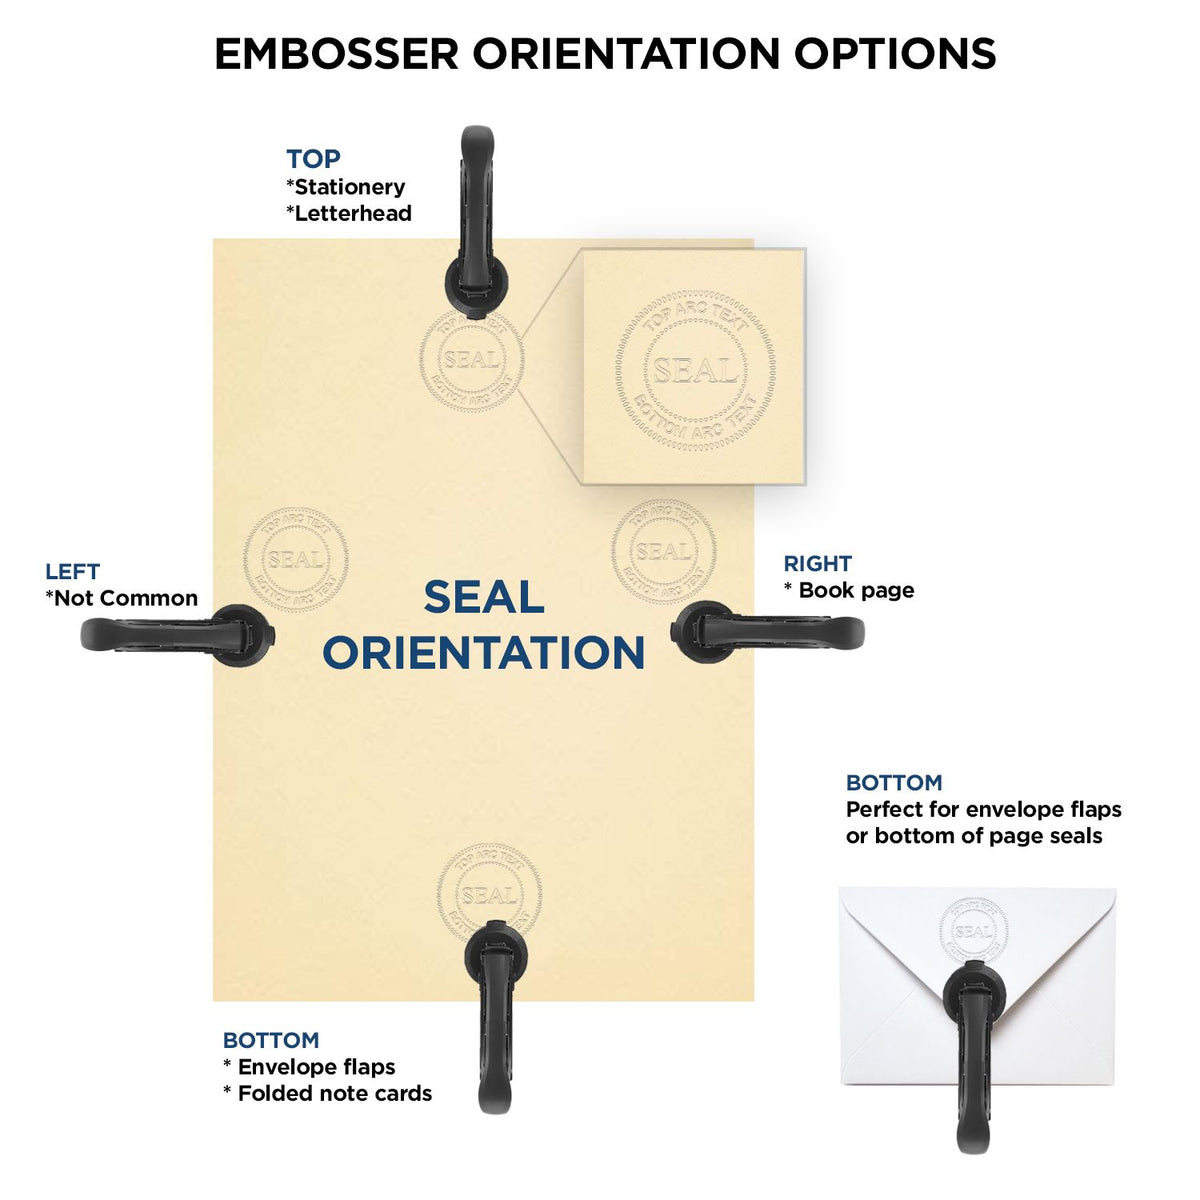 An infographic for the Handheld Indiana Architect Seal Embosser showing embosser orientation, this is showing examples of a top, bottom, right and left insert.